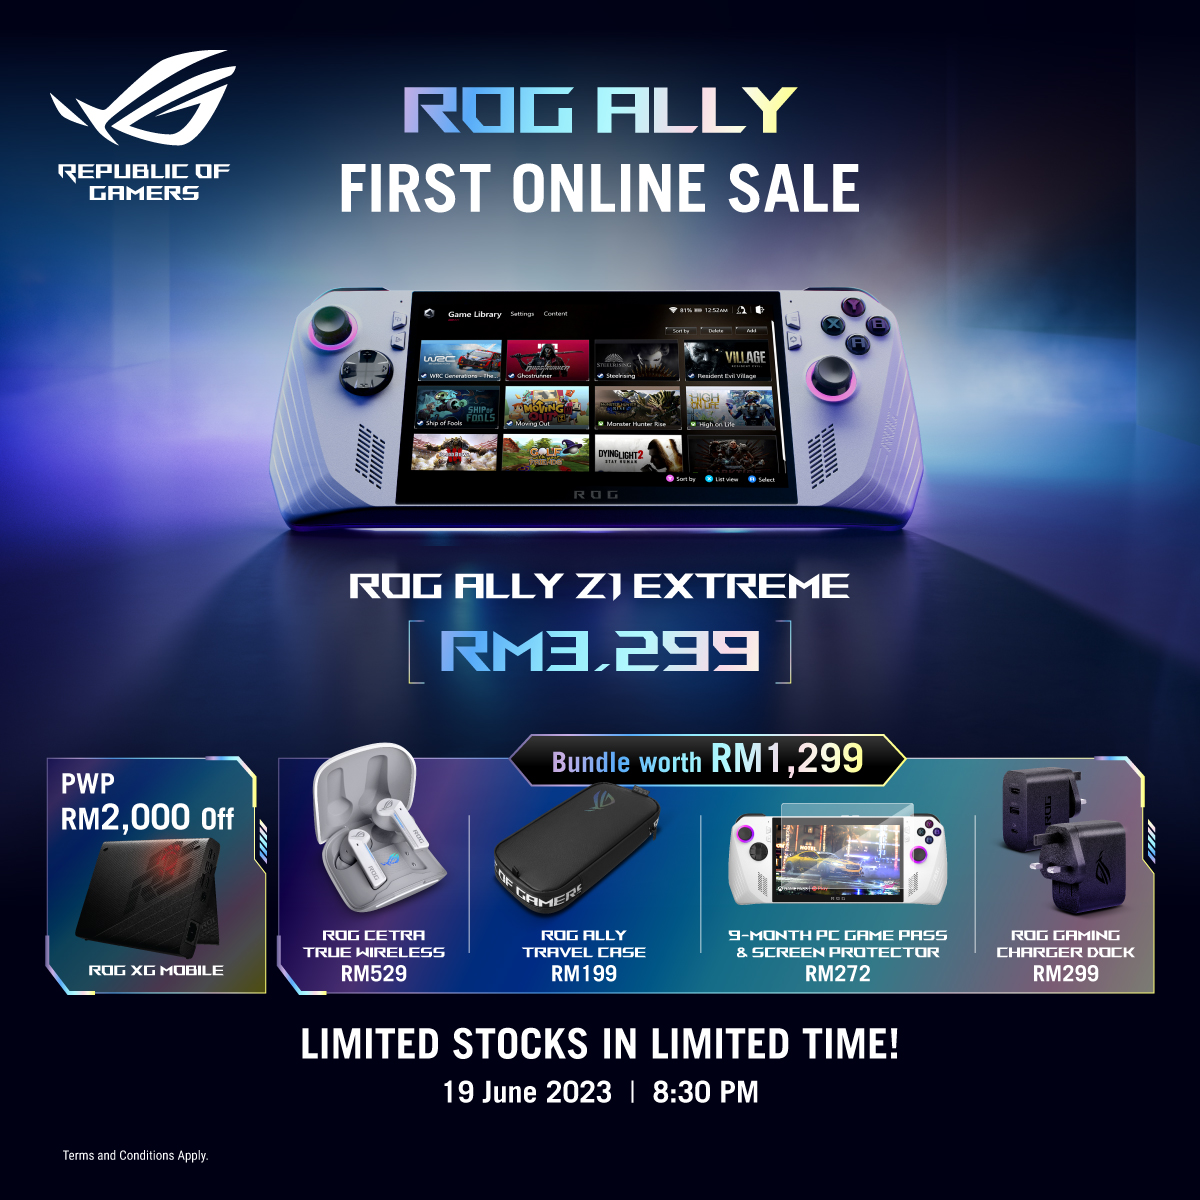 ASUS Malaysia Officially Launching ROG Ally In July 1st, Priced At RM3299 37